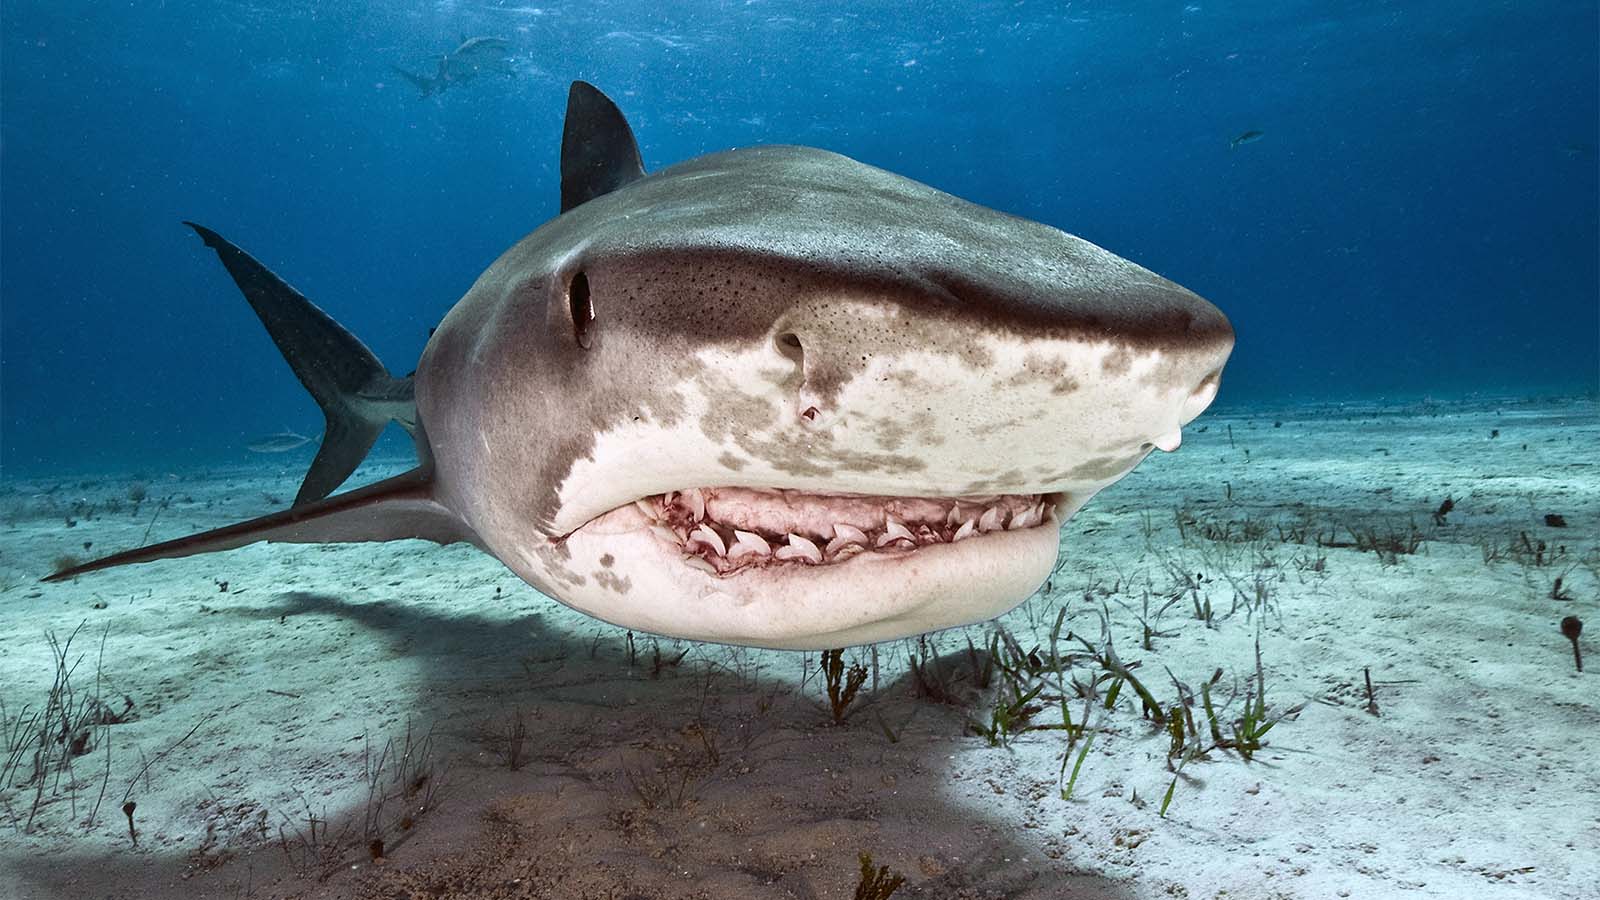 It's OK If You Don't Know Much About Animals. Take This Quiz to Learn Something New Tiger sharks (Galeocerdo cuvier) are common visitors of the reefs north of the Bahamas in the Caribbean